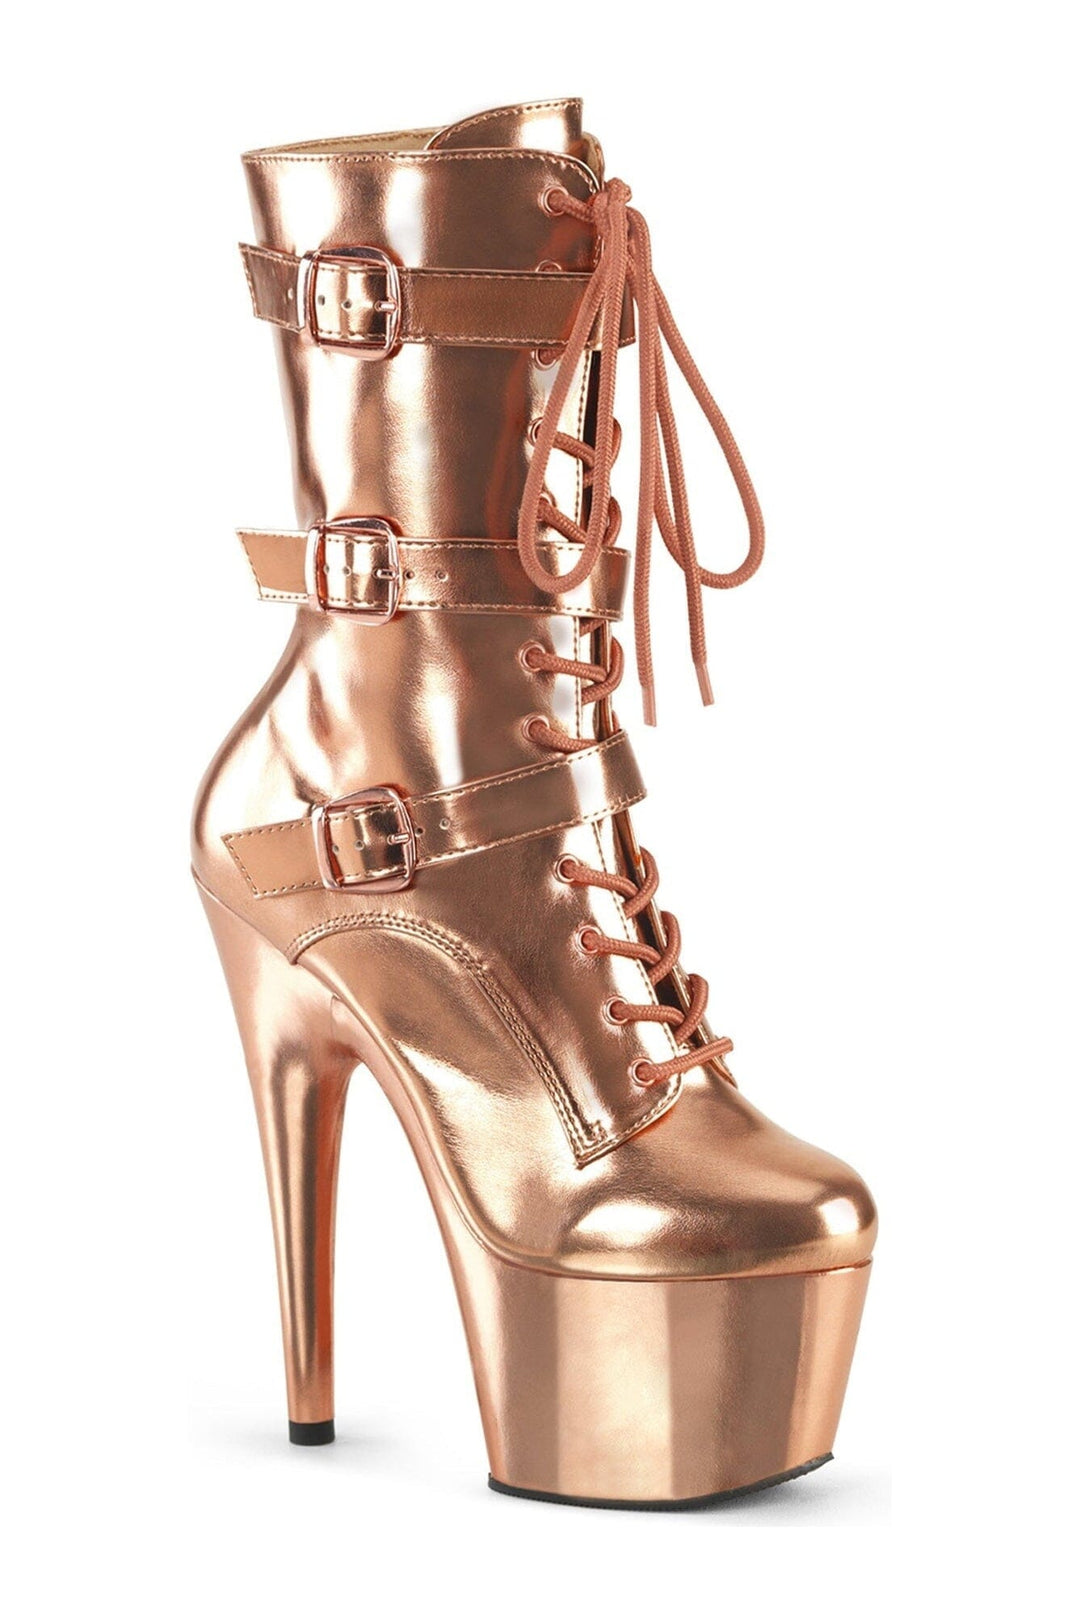 ADORE-1043 Rose Gold Metallic Faux Leather Ankle Boot-Ankle Boots-Pleaser-Rose Gold-10-Metallic Faux Leather-SEXYSHOES.COM